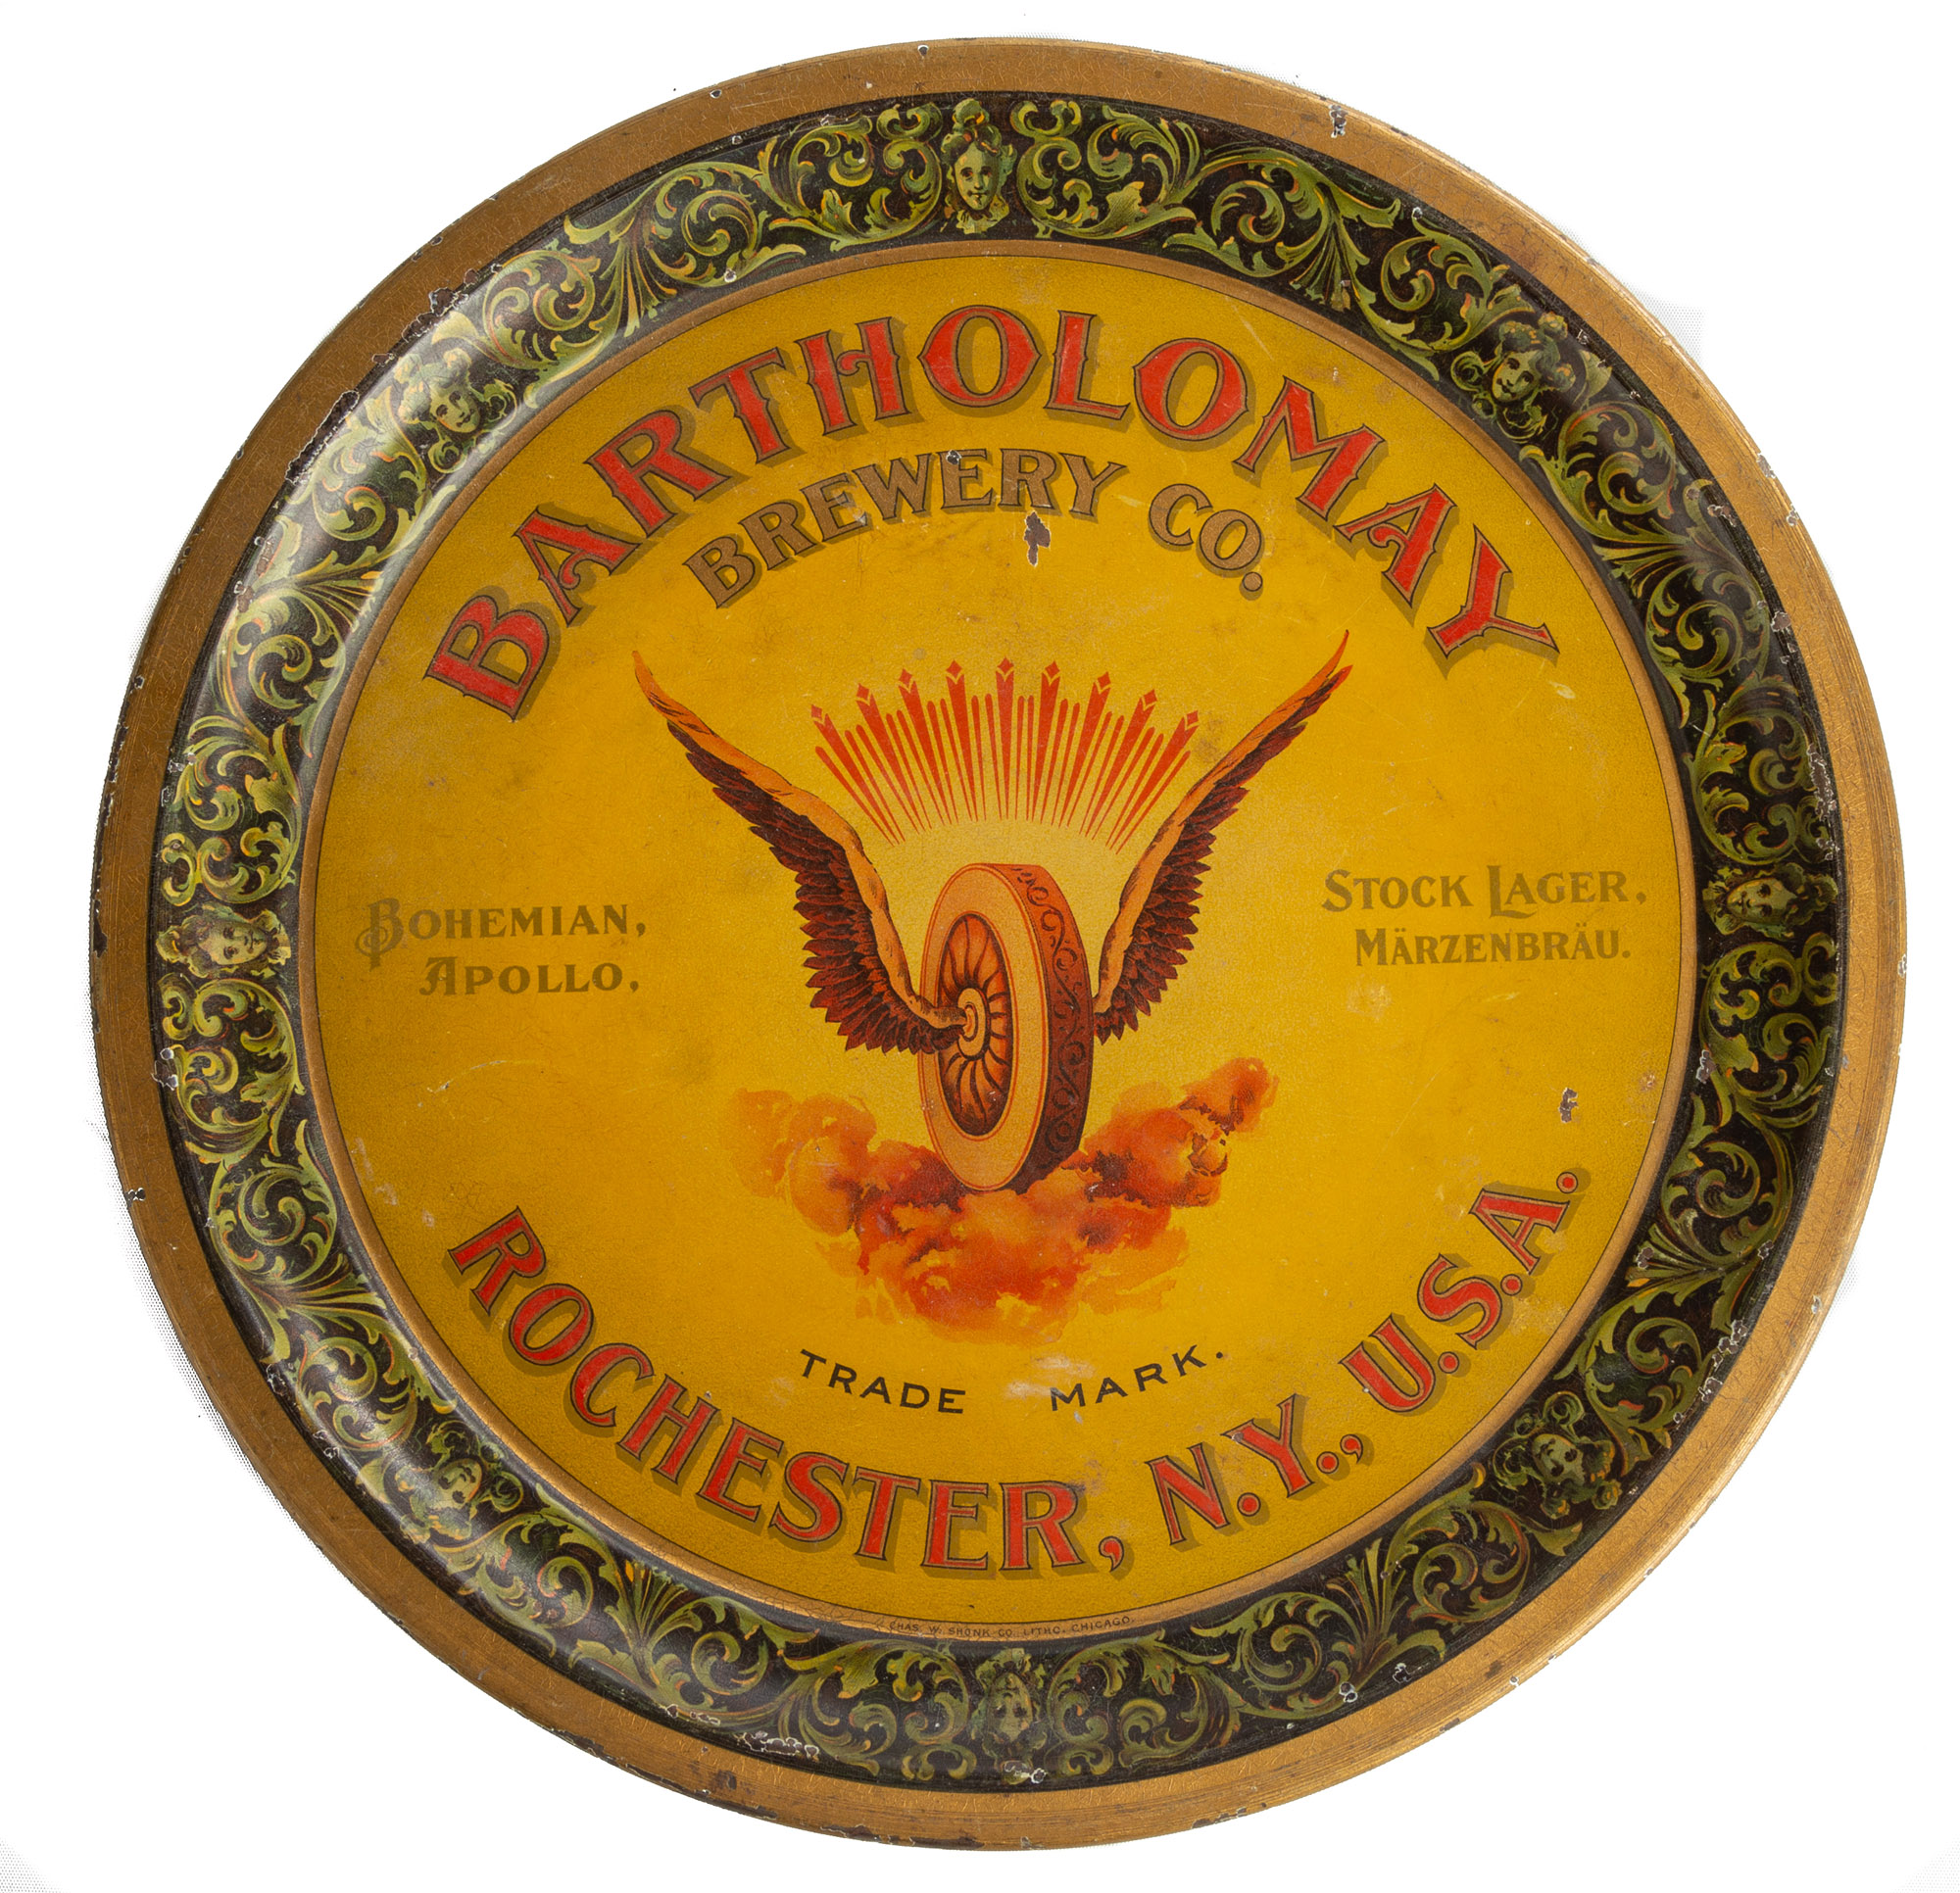 BARTHOLOMAY BREWERY CO ROCHESTER  28bd44